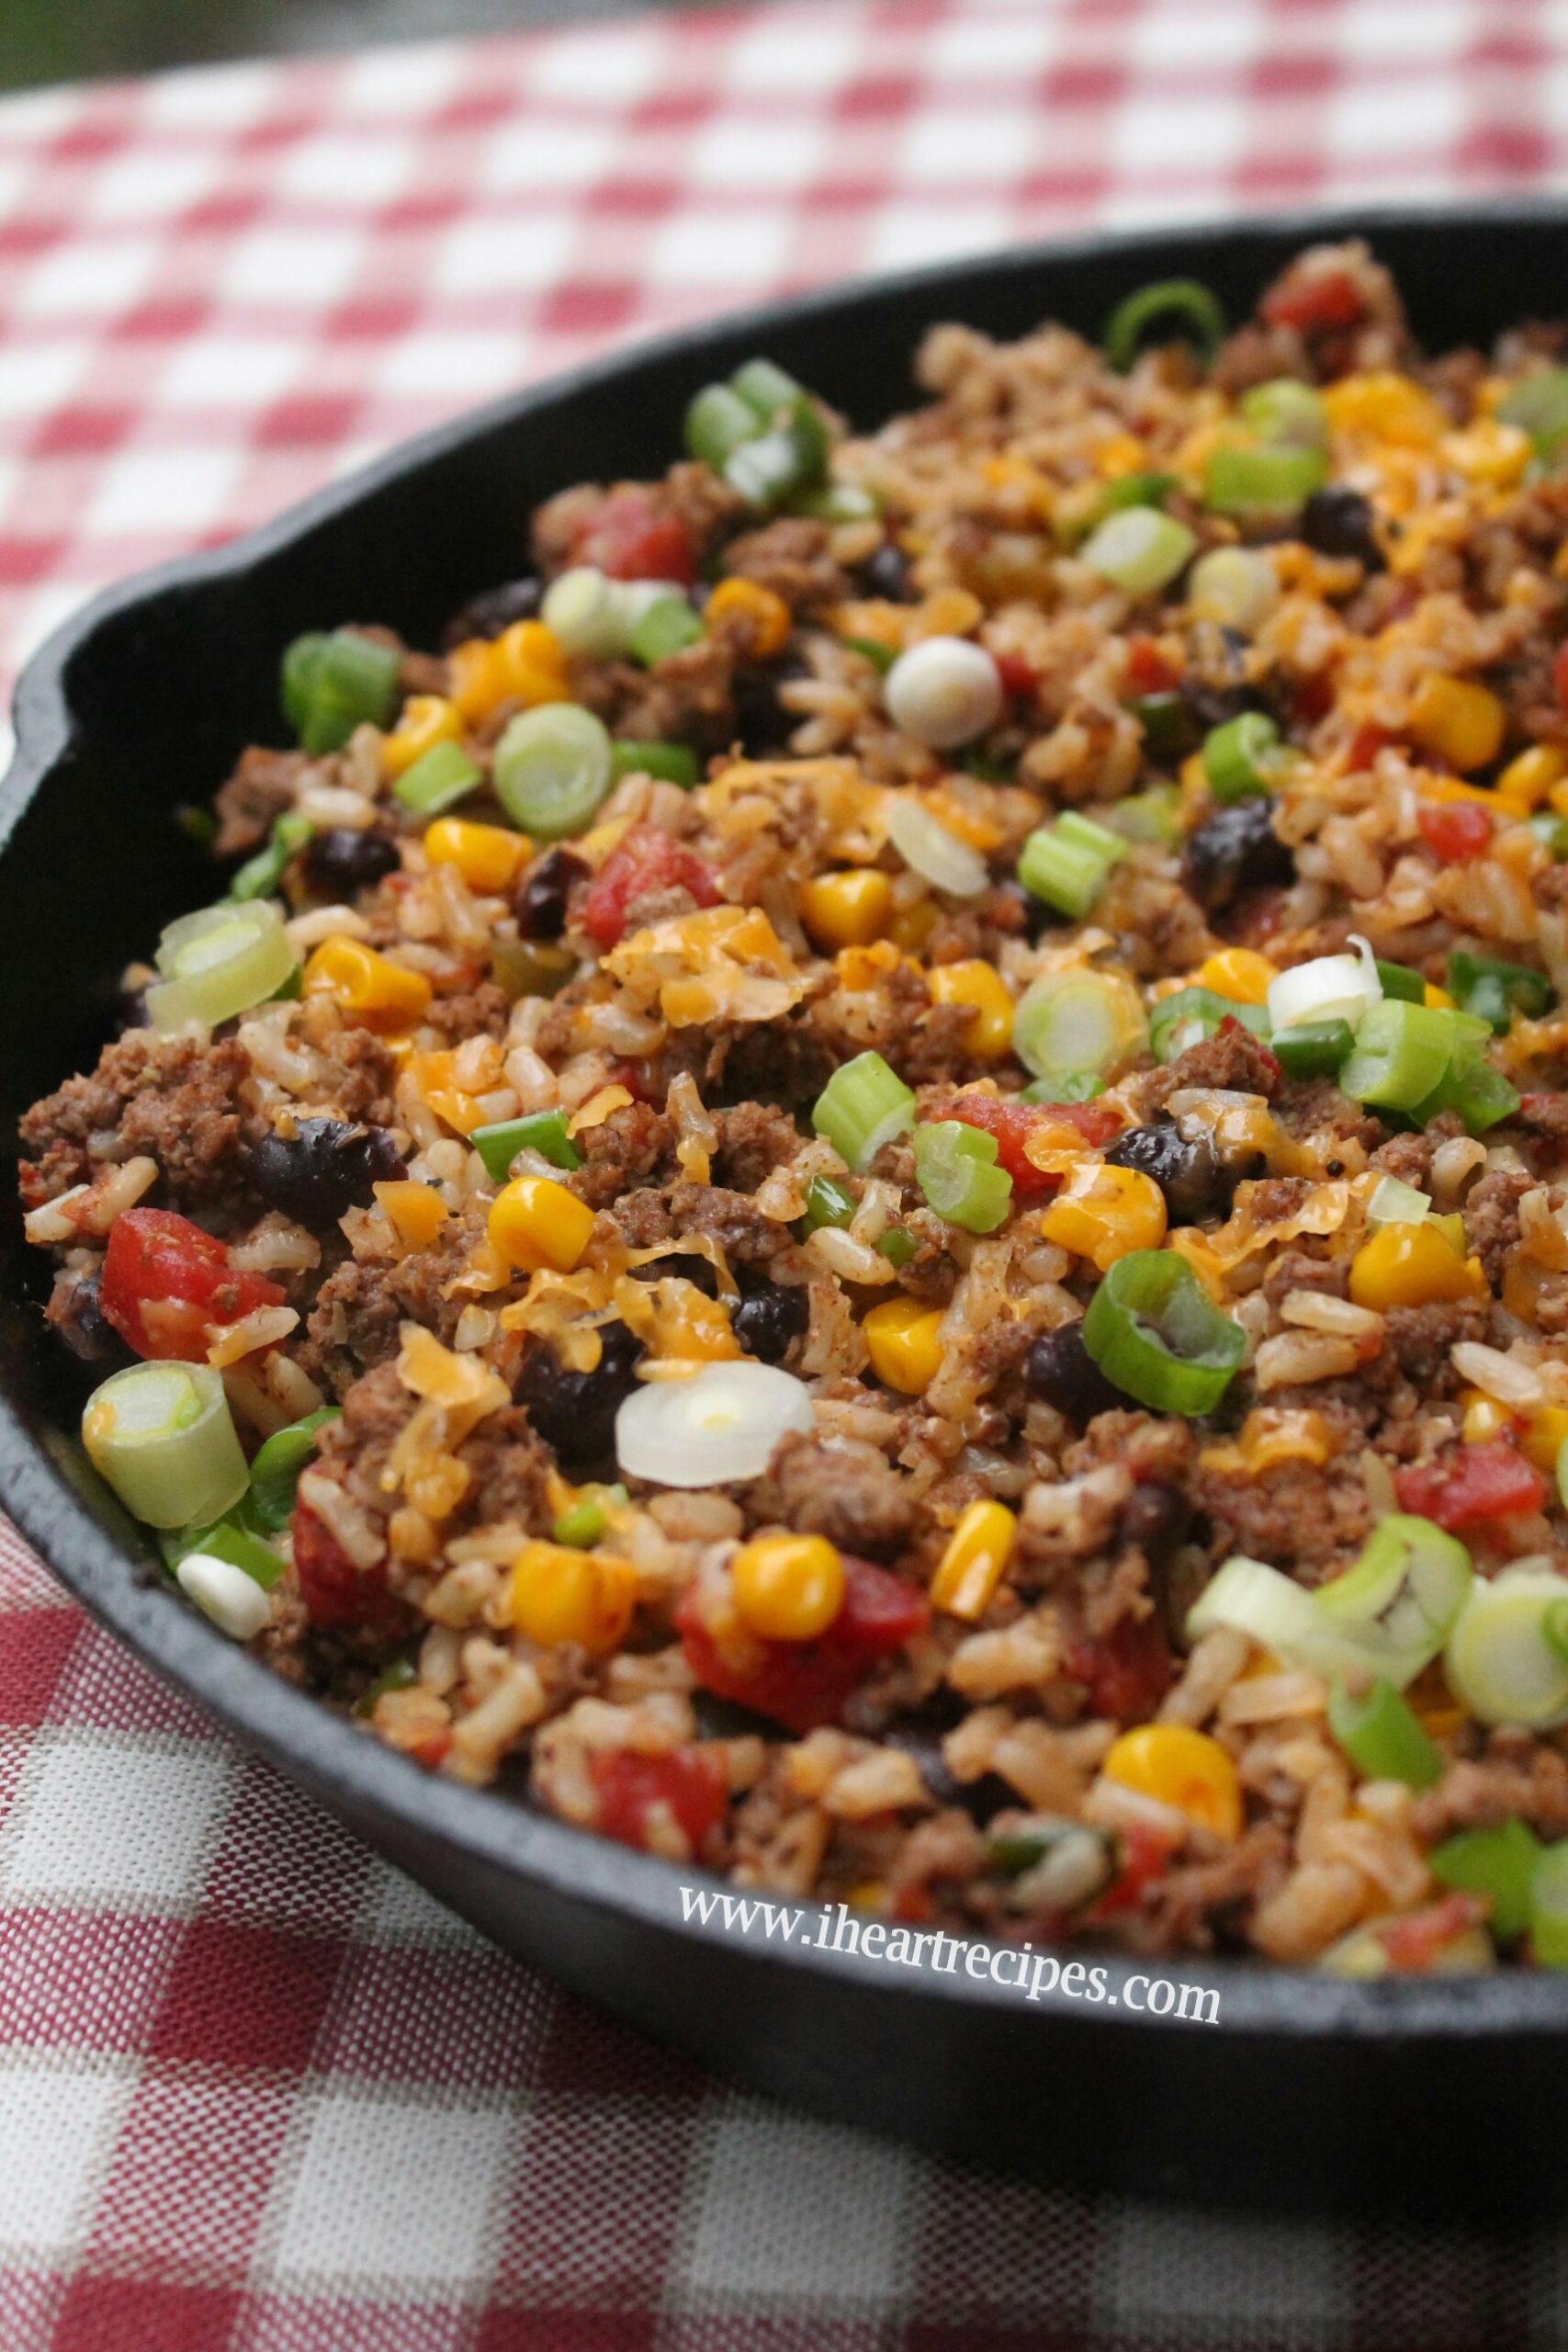 Simple Recipes With Ground Beef
 Tex Mex Ground Beef Skillet I Heart Recipes